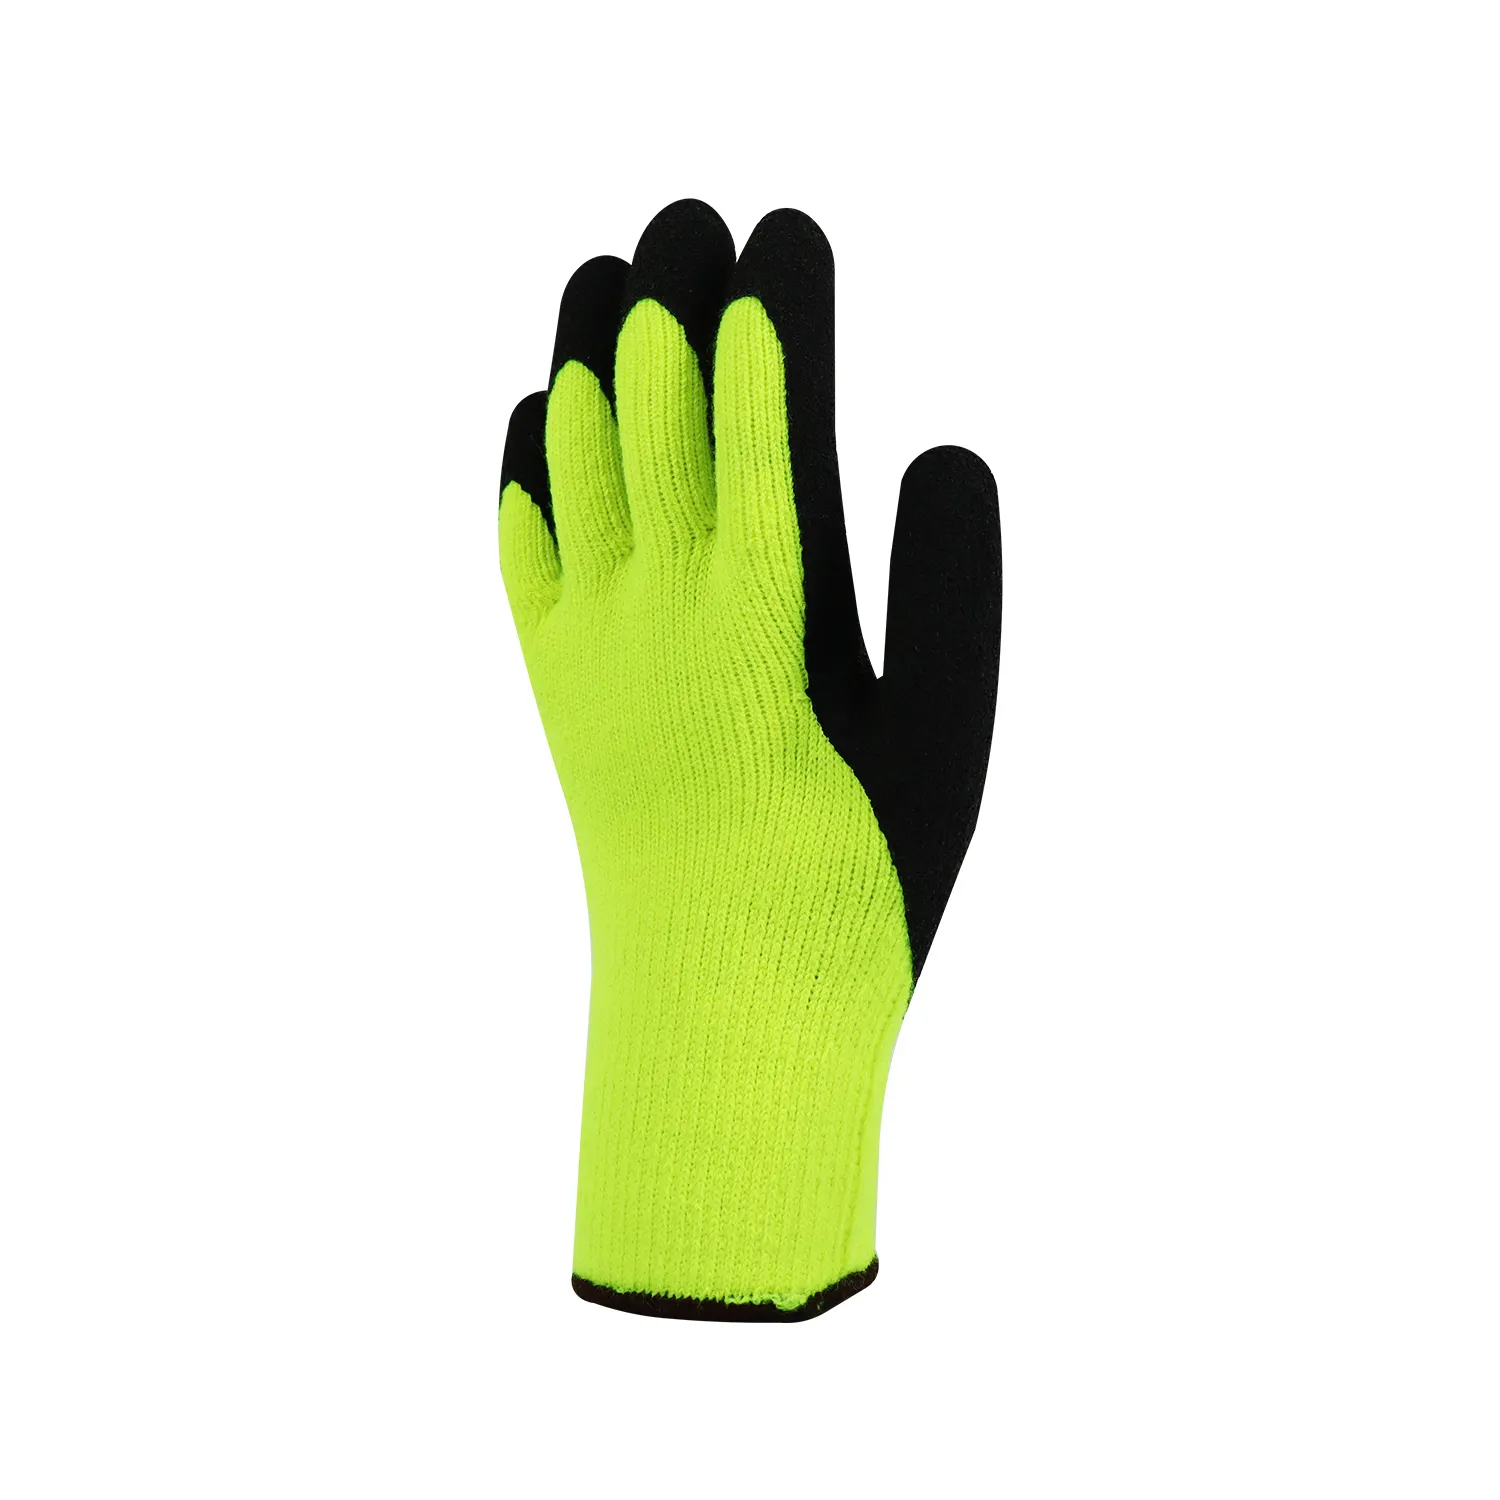 HYCOM A7FCL Cold Weather Waterproof Winter Work Gloves Crinkle Latex Palm Dipped Winter Gloves for Working